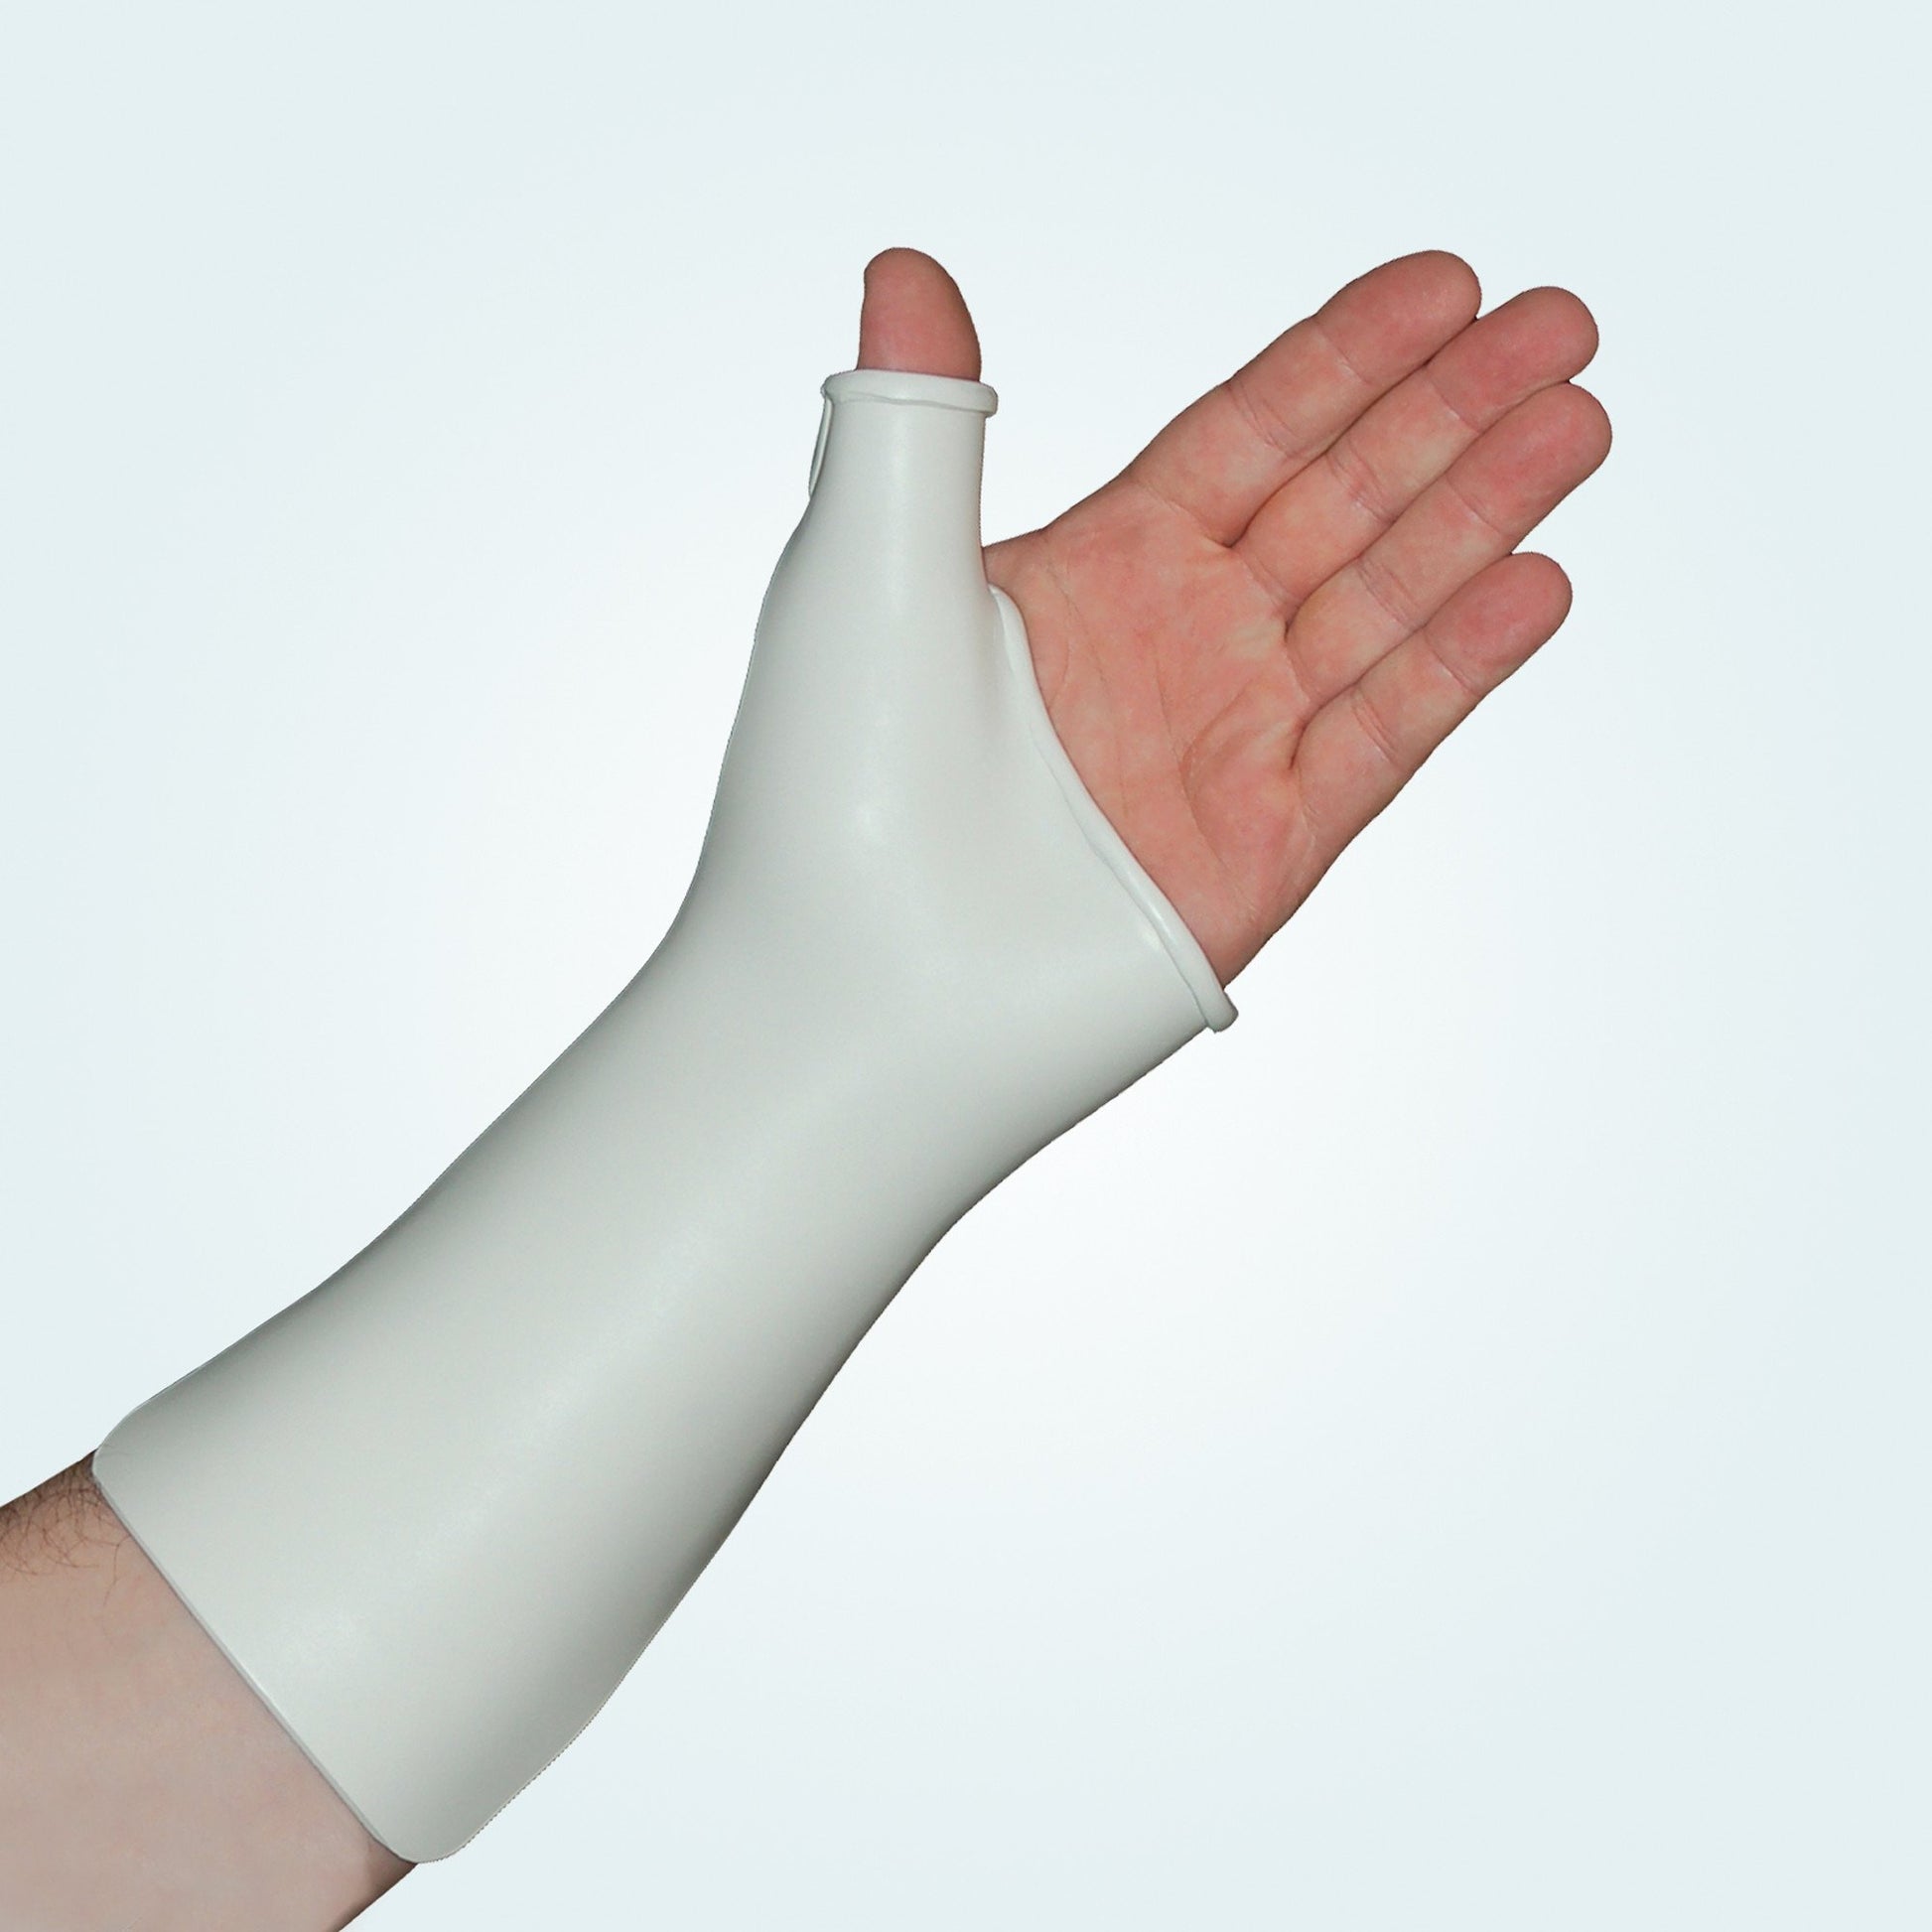 Beneplas Max thermoplastic, applied to a arm.